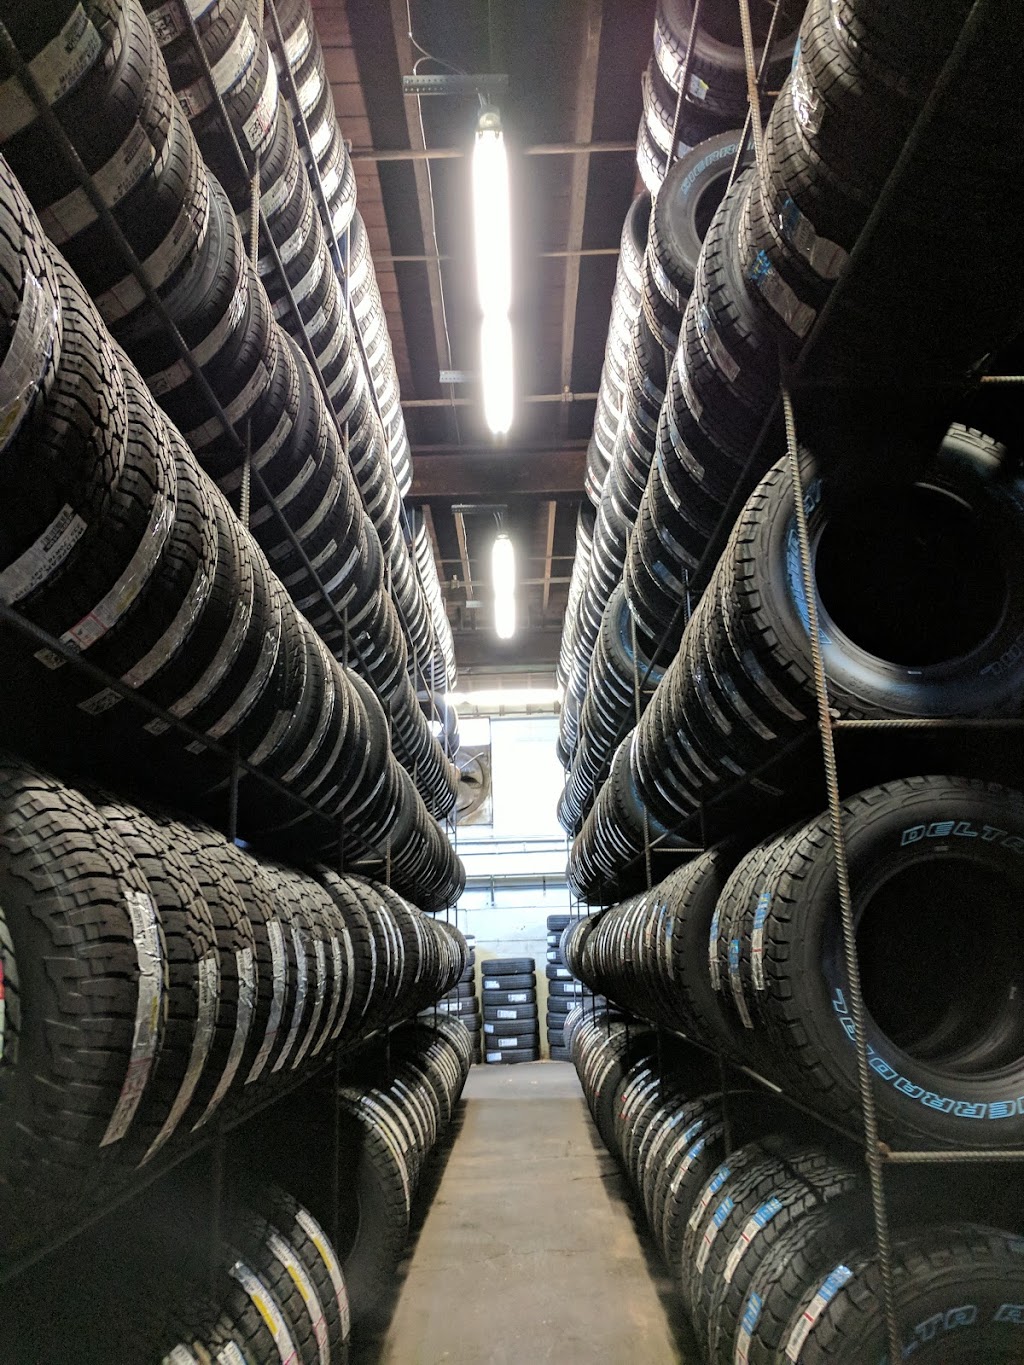 Export Tire | 6155 Old William Penn Hwy, Export, PA 15632, USA | Phone: (724) 327-1200